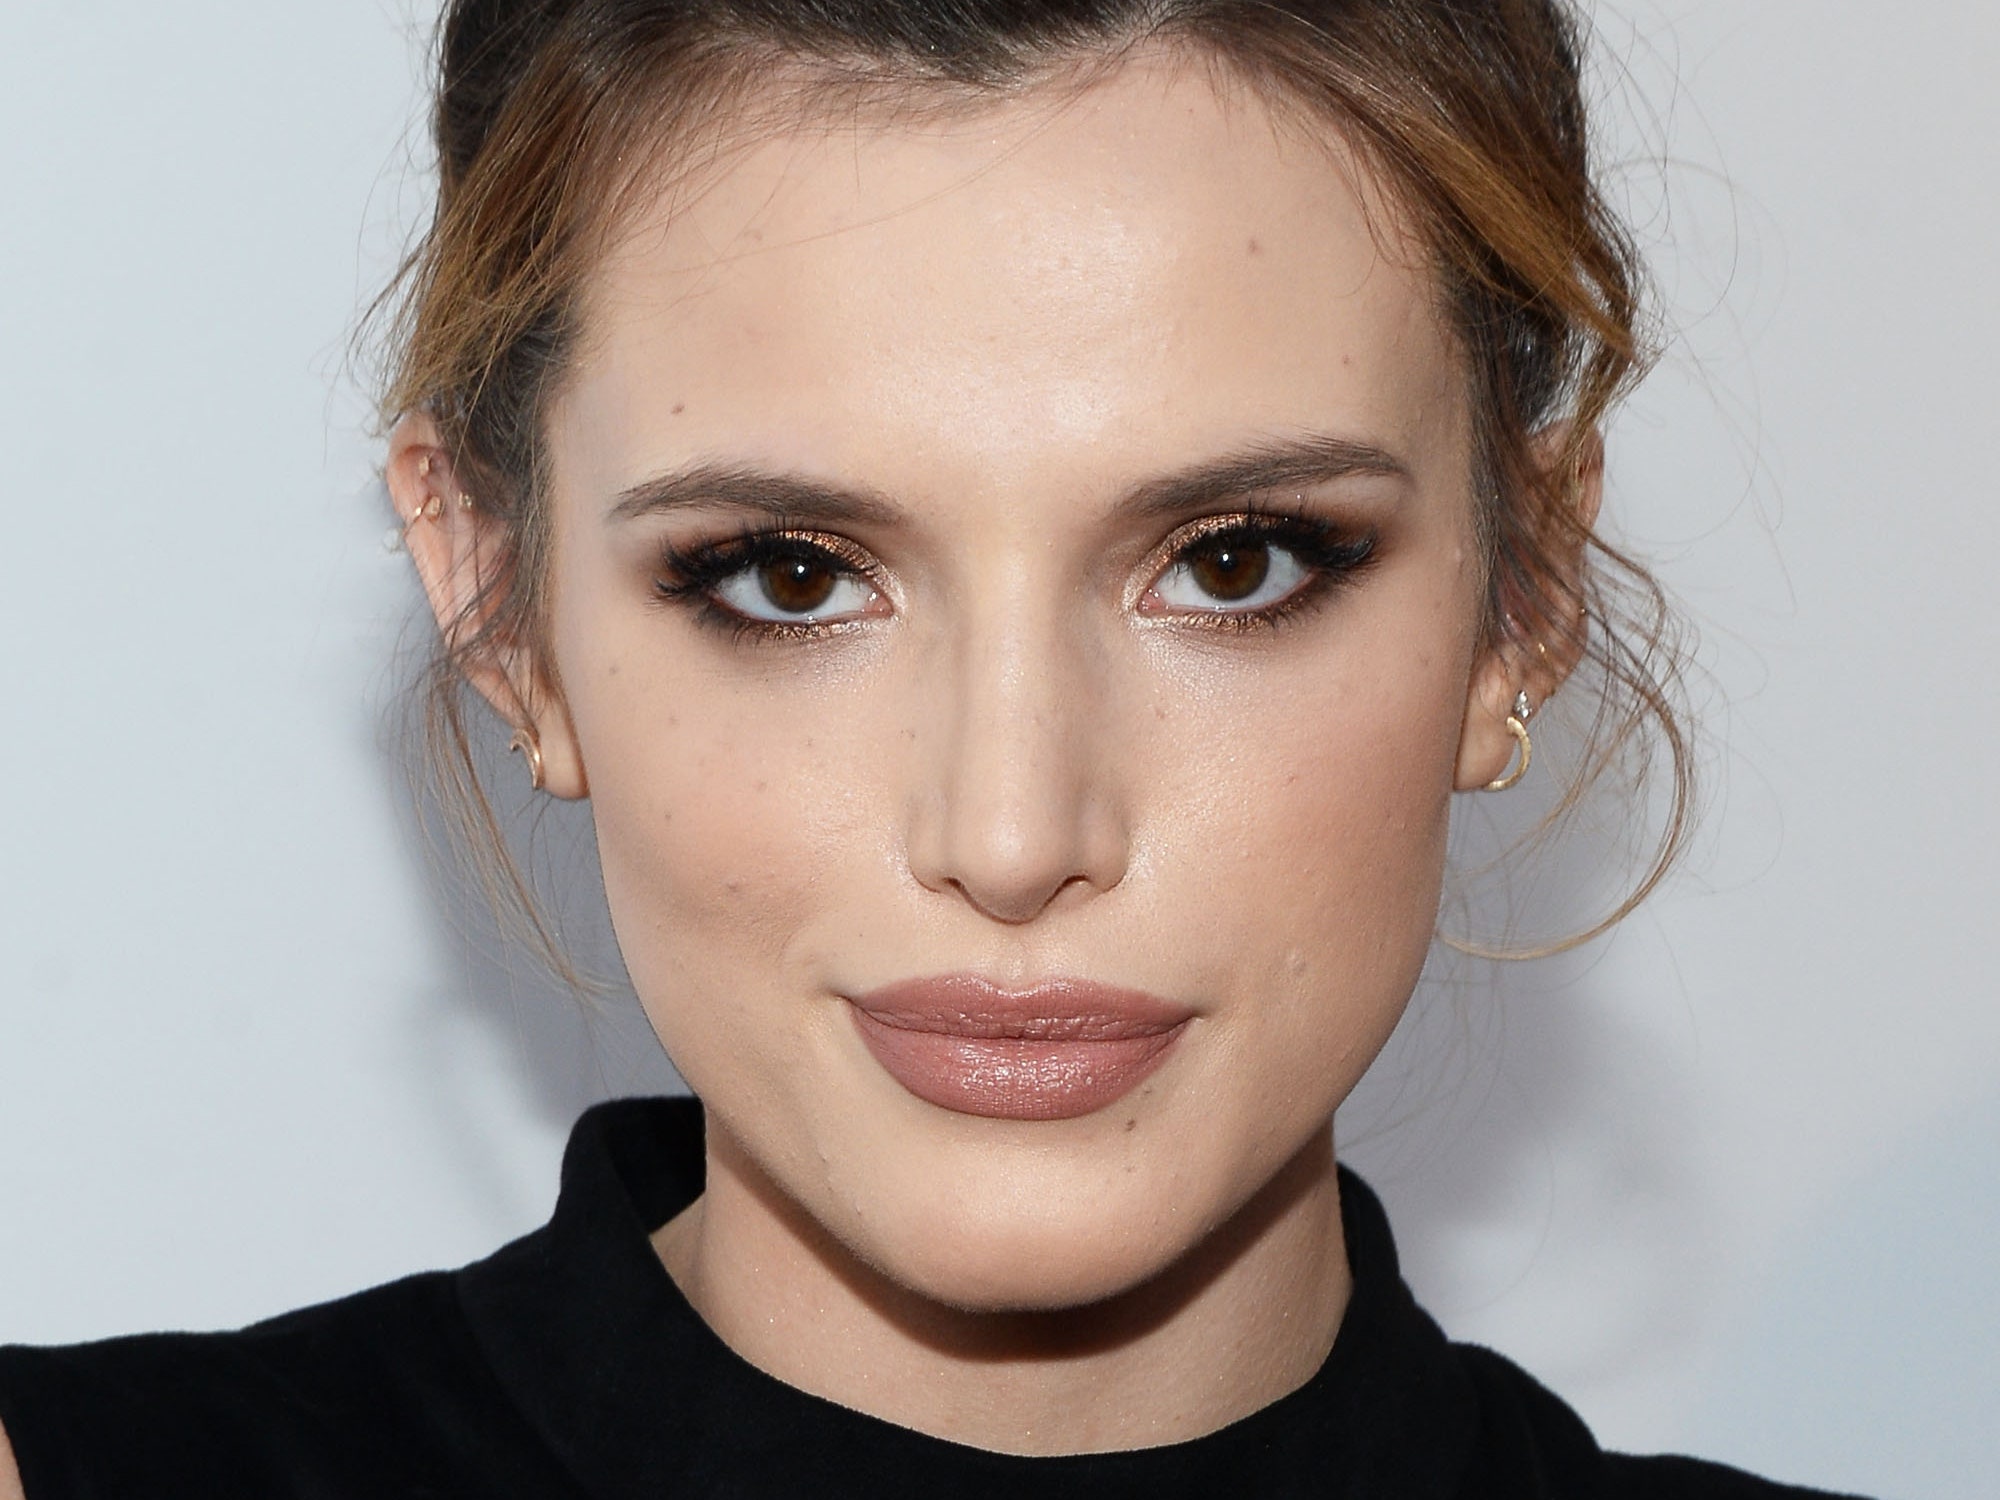 bill gebauer recommends bella thorne playboy shoot pic